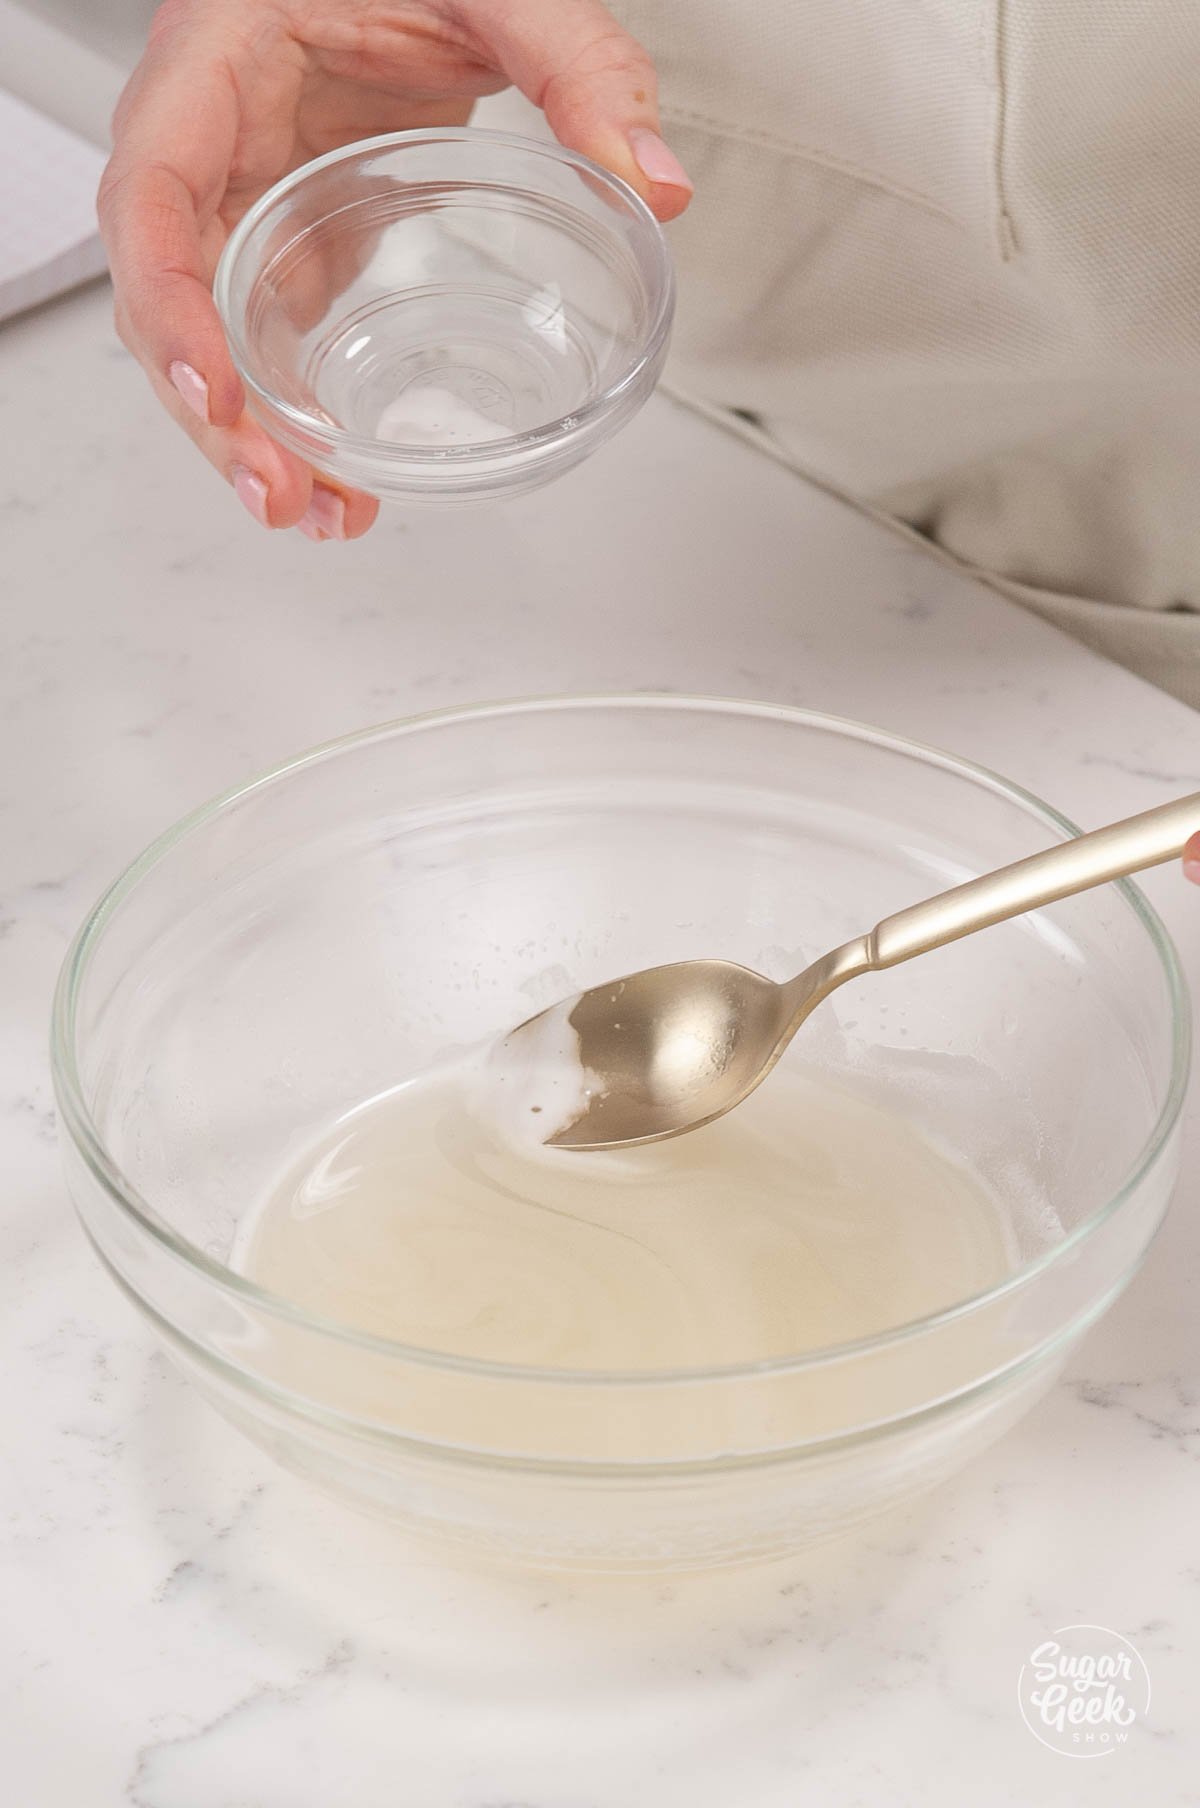 margarita gelatin melted in a clear bowl with a spoon